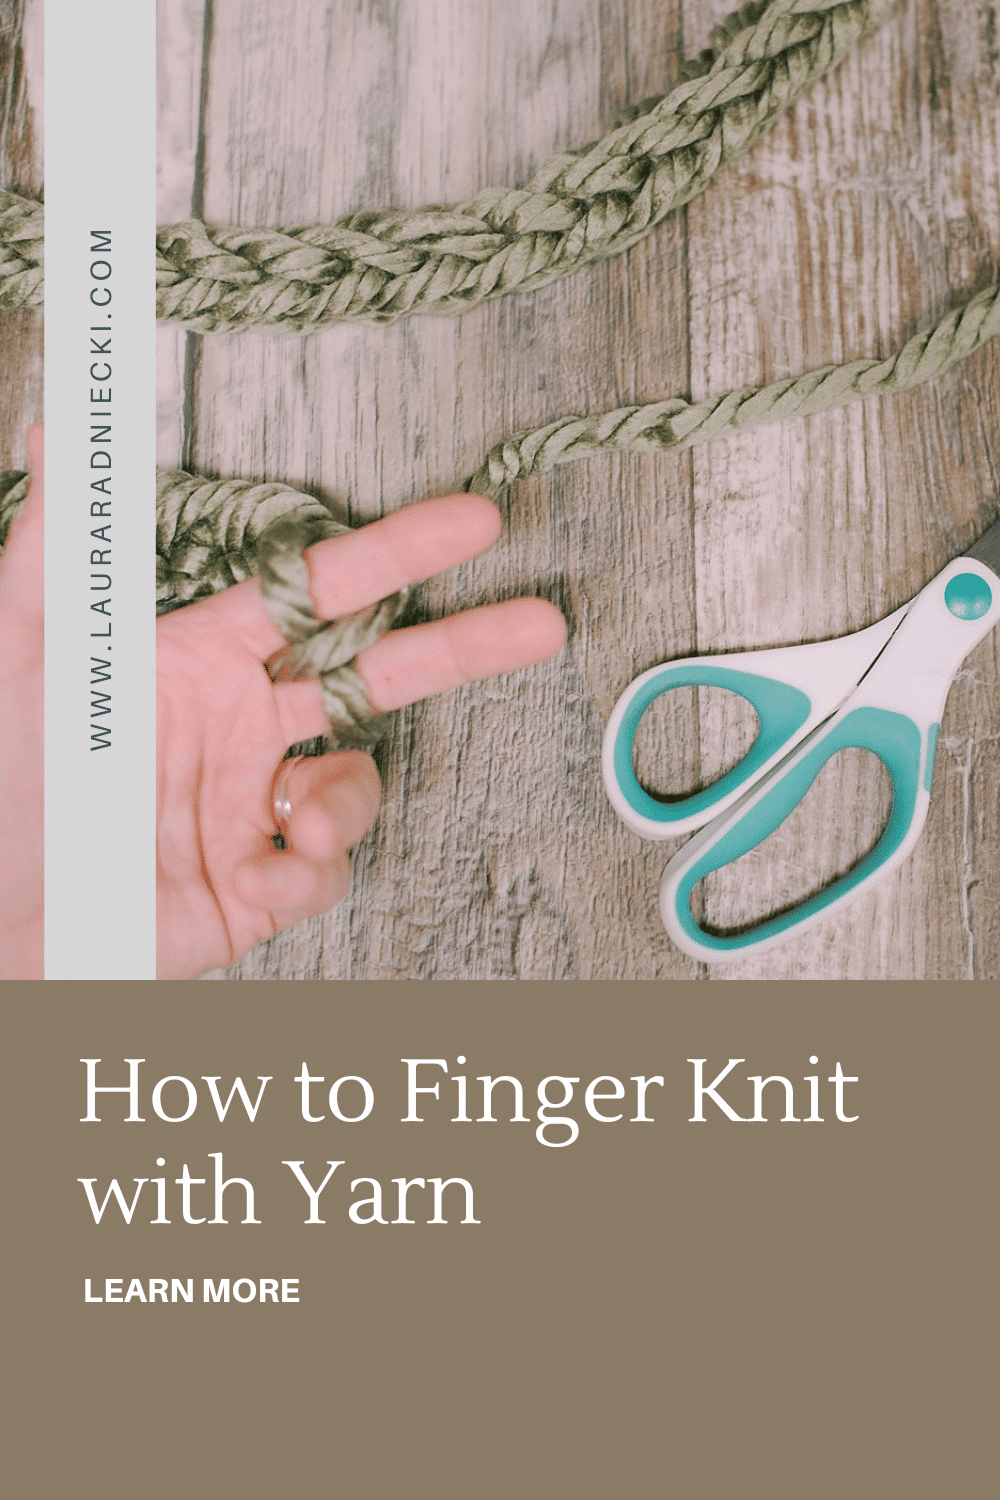 How to Finger Knit using Yarn (The Two Finger Technique)